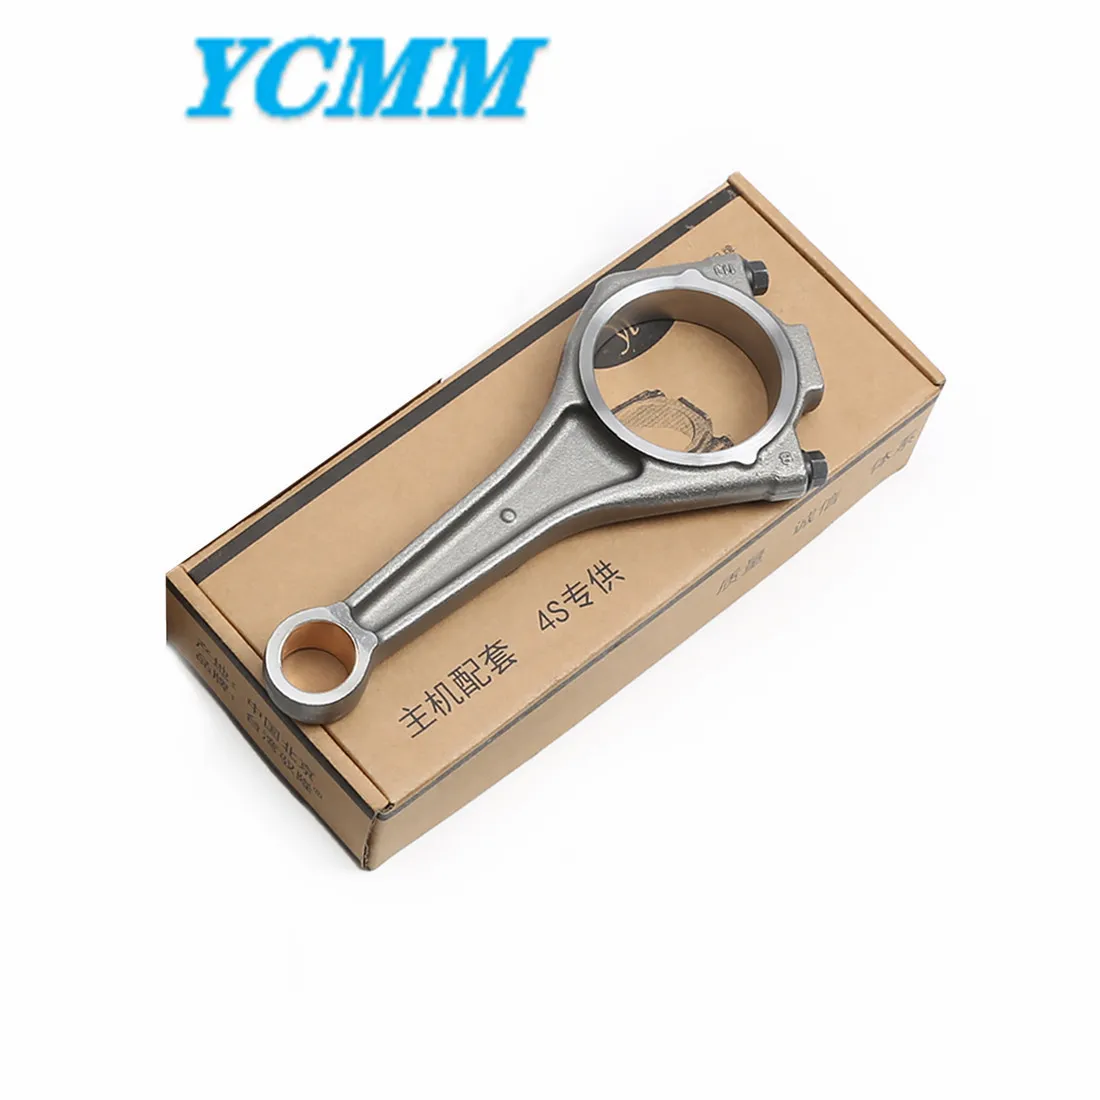 

New Engine Connecting Rod AJ126 306PS STD For Jaguar XF XJ F-Pace -Type Land Rover Range Rover Sport Discovery LR4 3.0L V6 -Gas